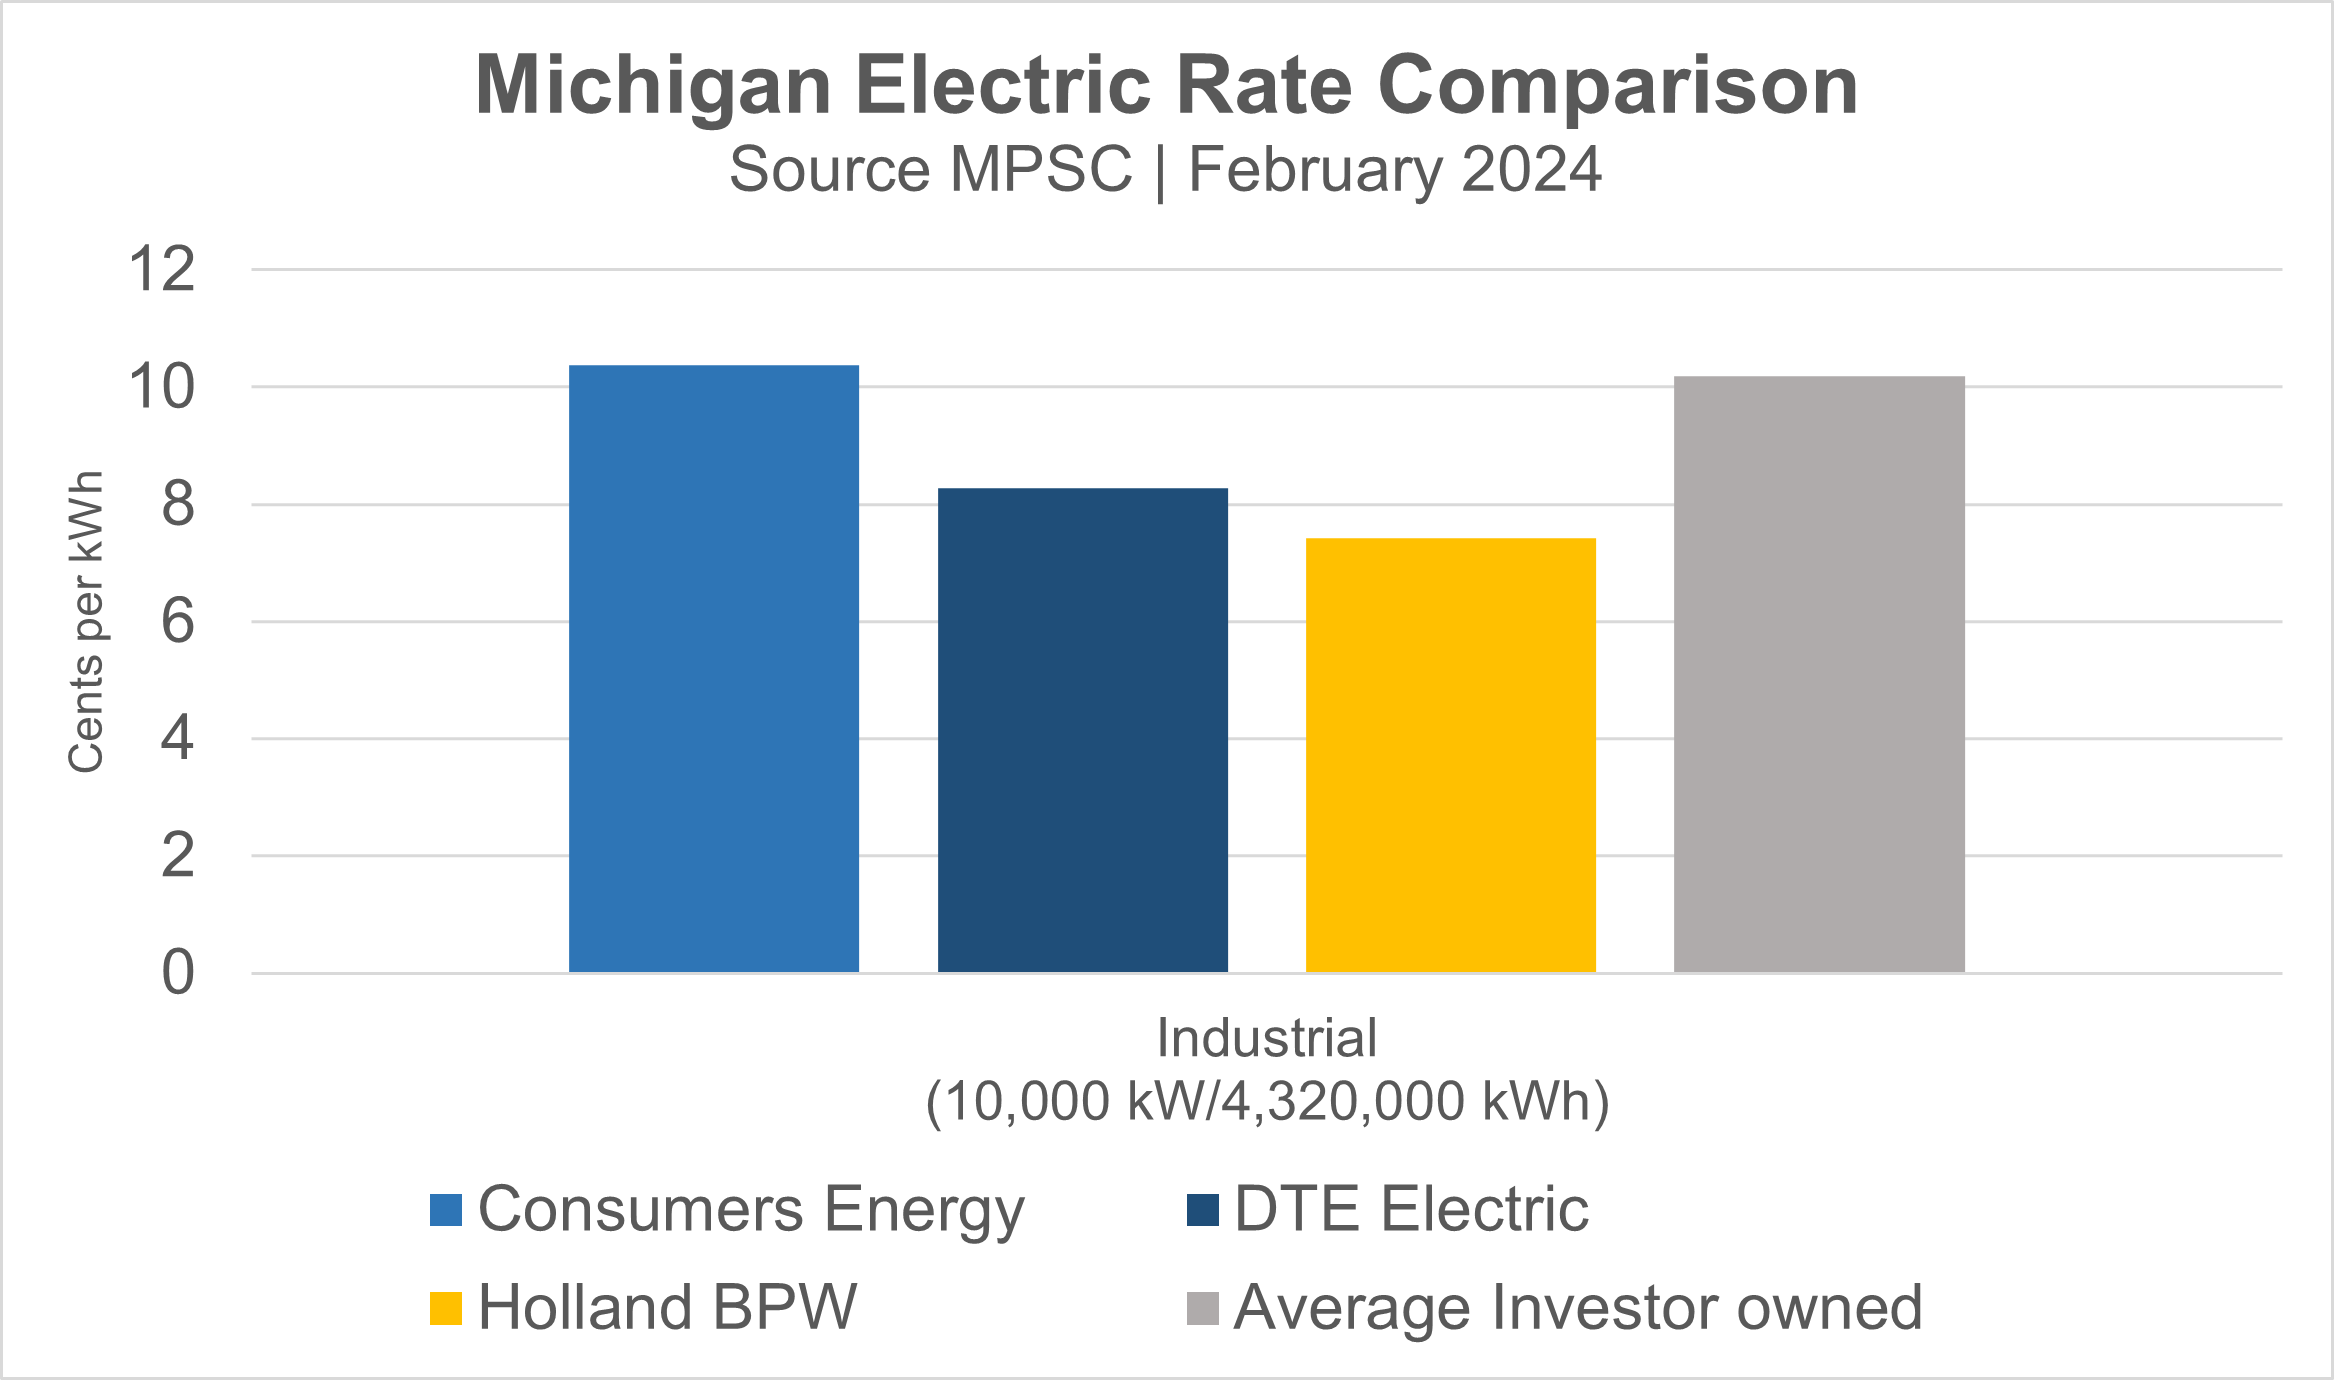 Bar graph shows that Holland BPW industrial electric rates the the lowest in comparison to Consumers Energy, DTE, and the average investor-owned utility.